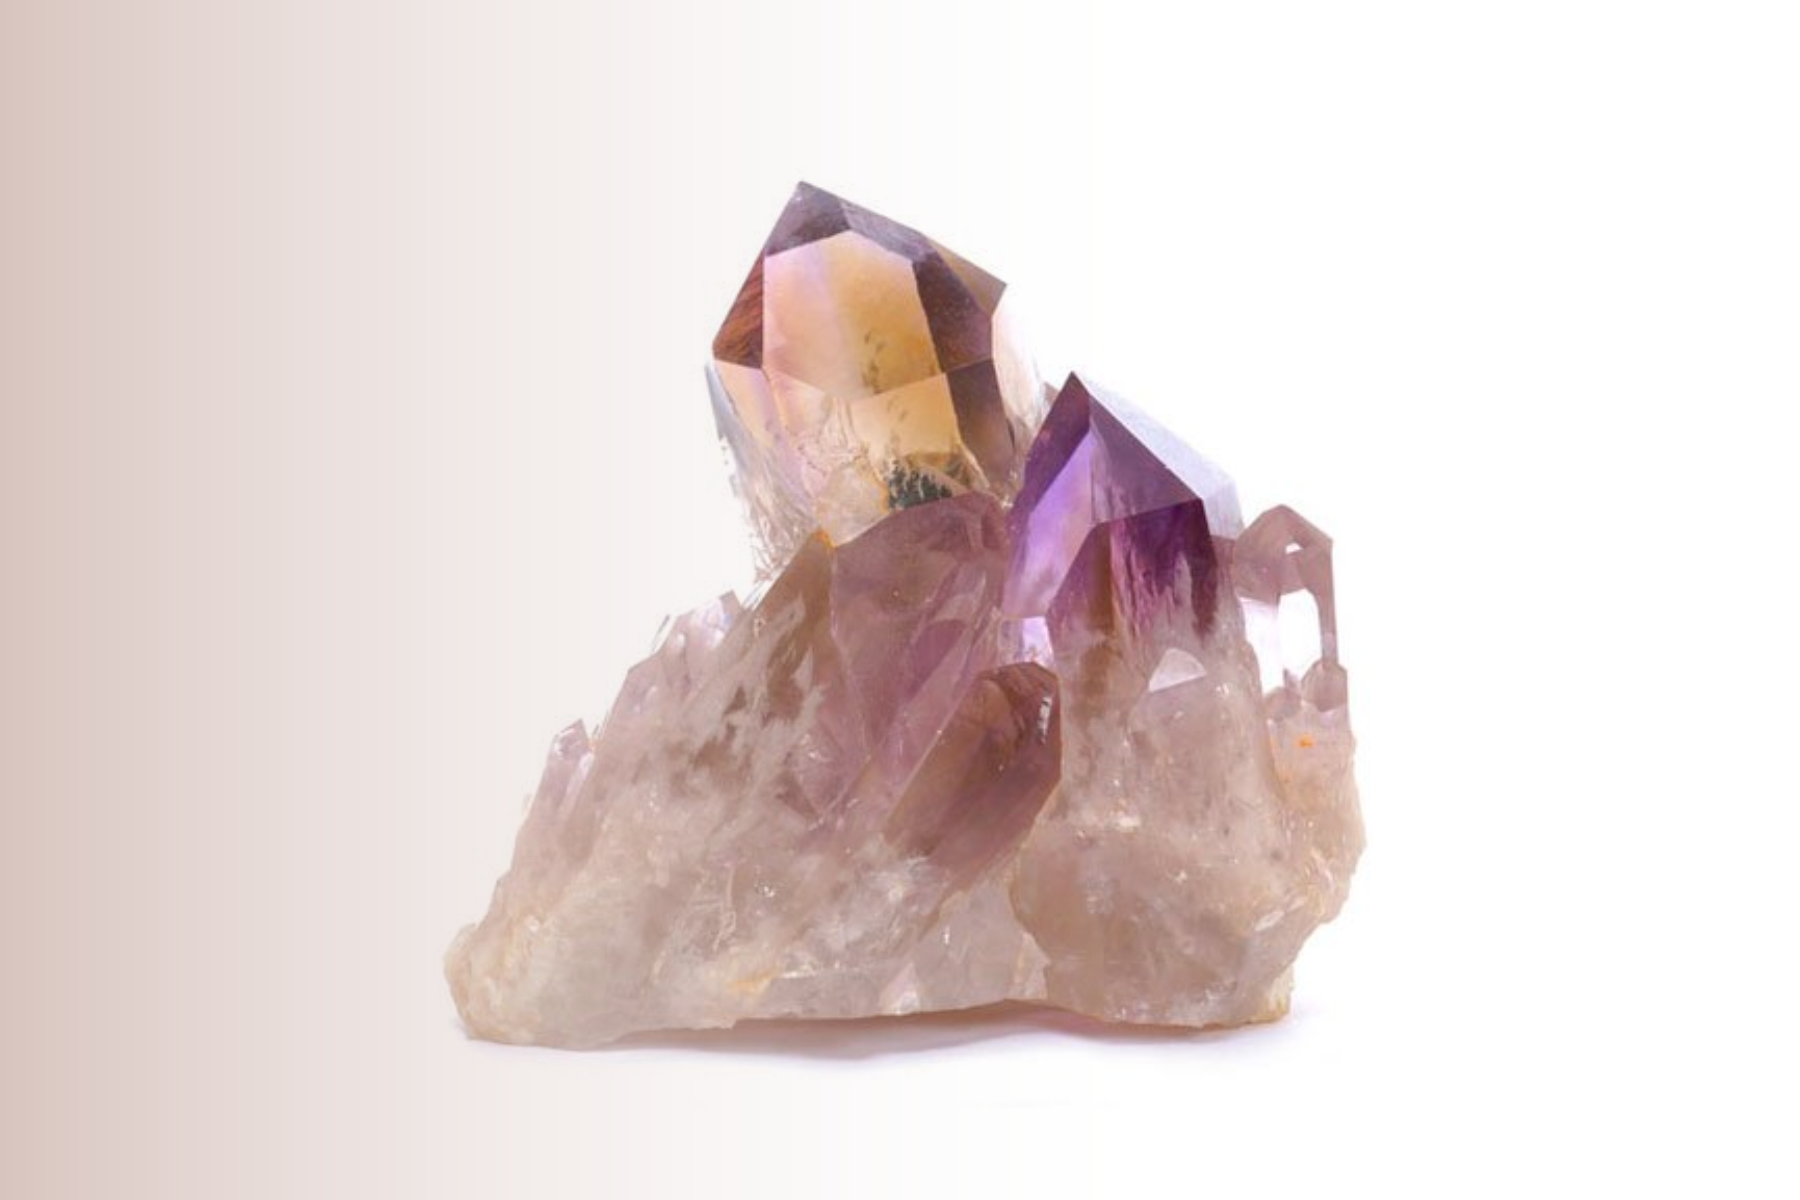 Ametrine crystal that is still connected to its host rock